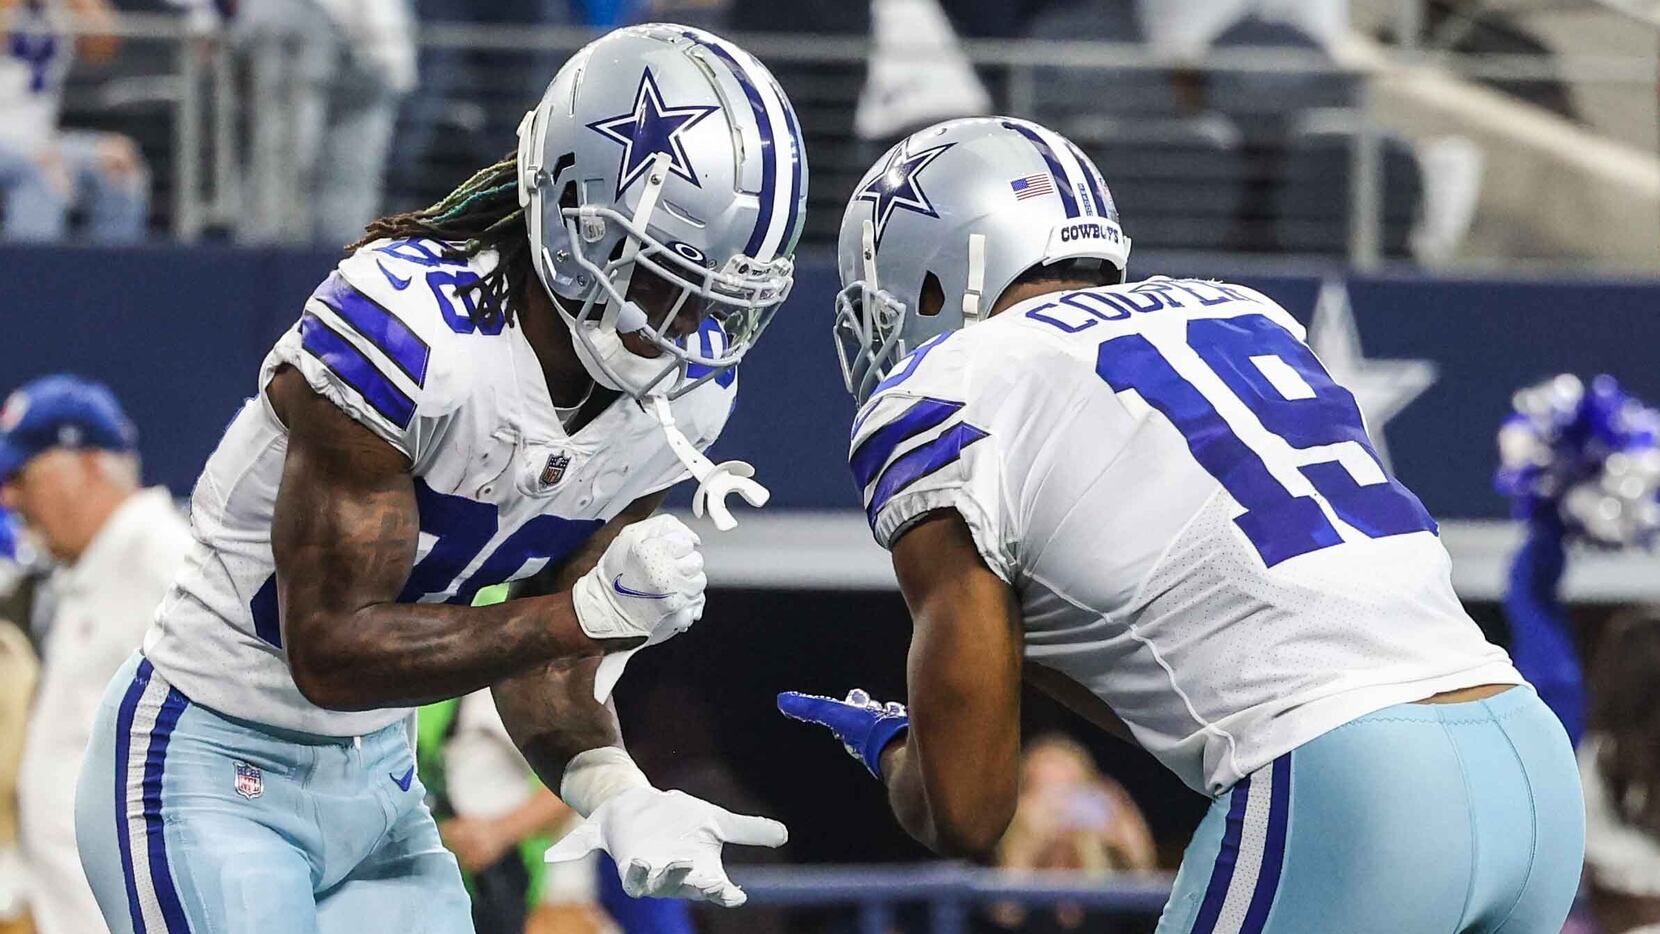 Is CeeDee Lamb ready to be Cowboys' No. 1 WR? Amari Cooper thinks so